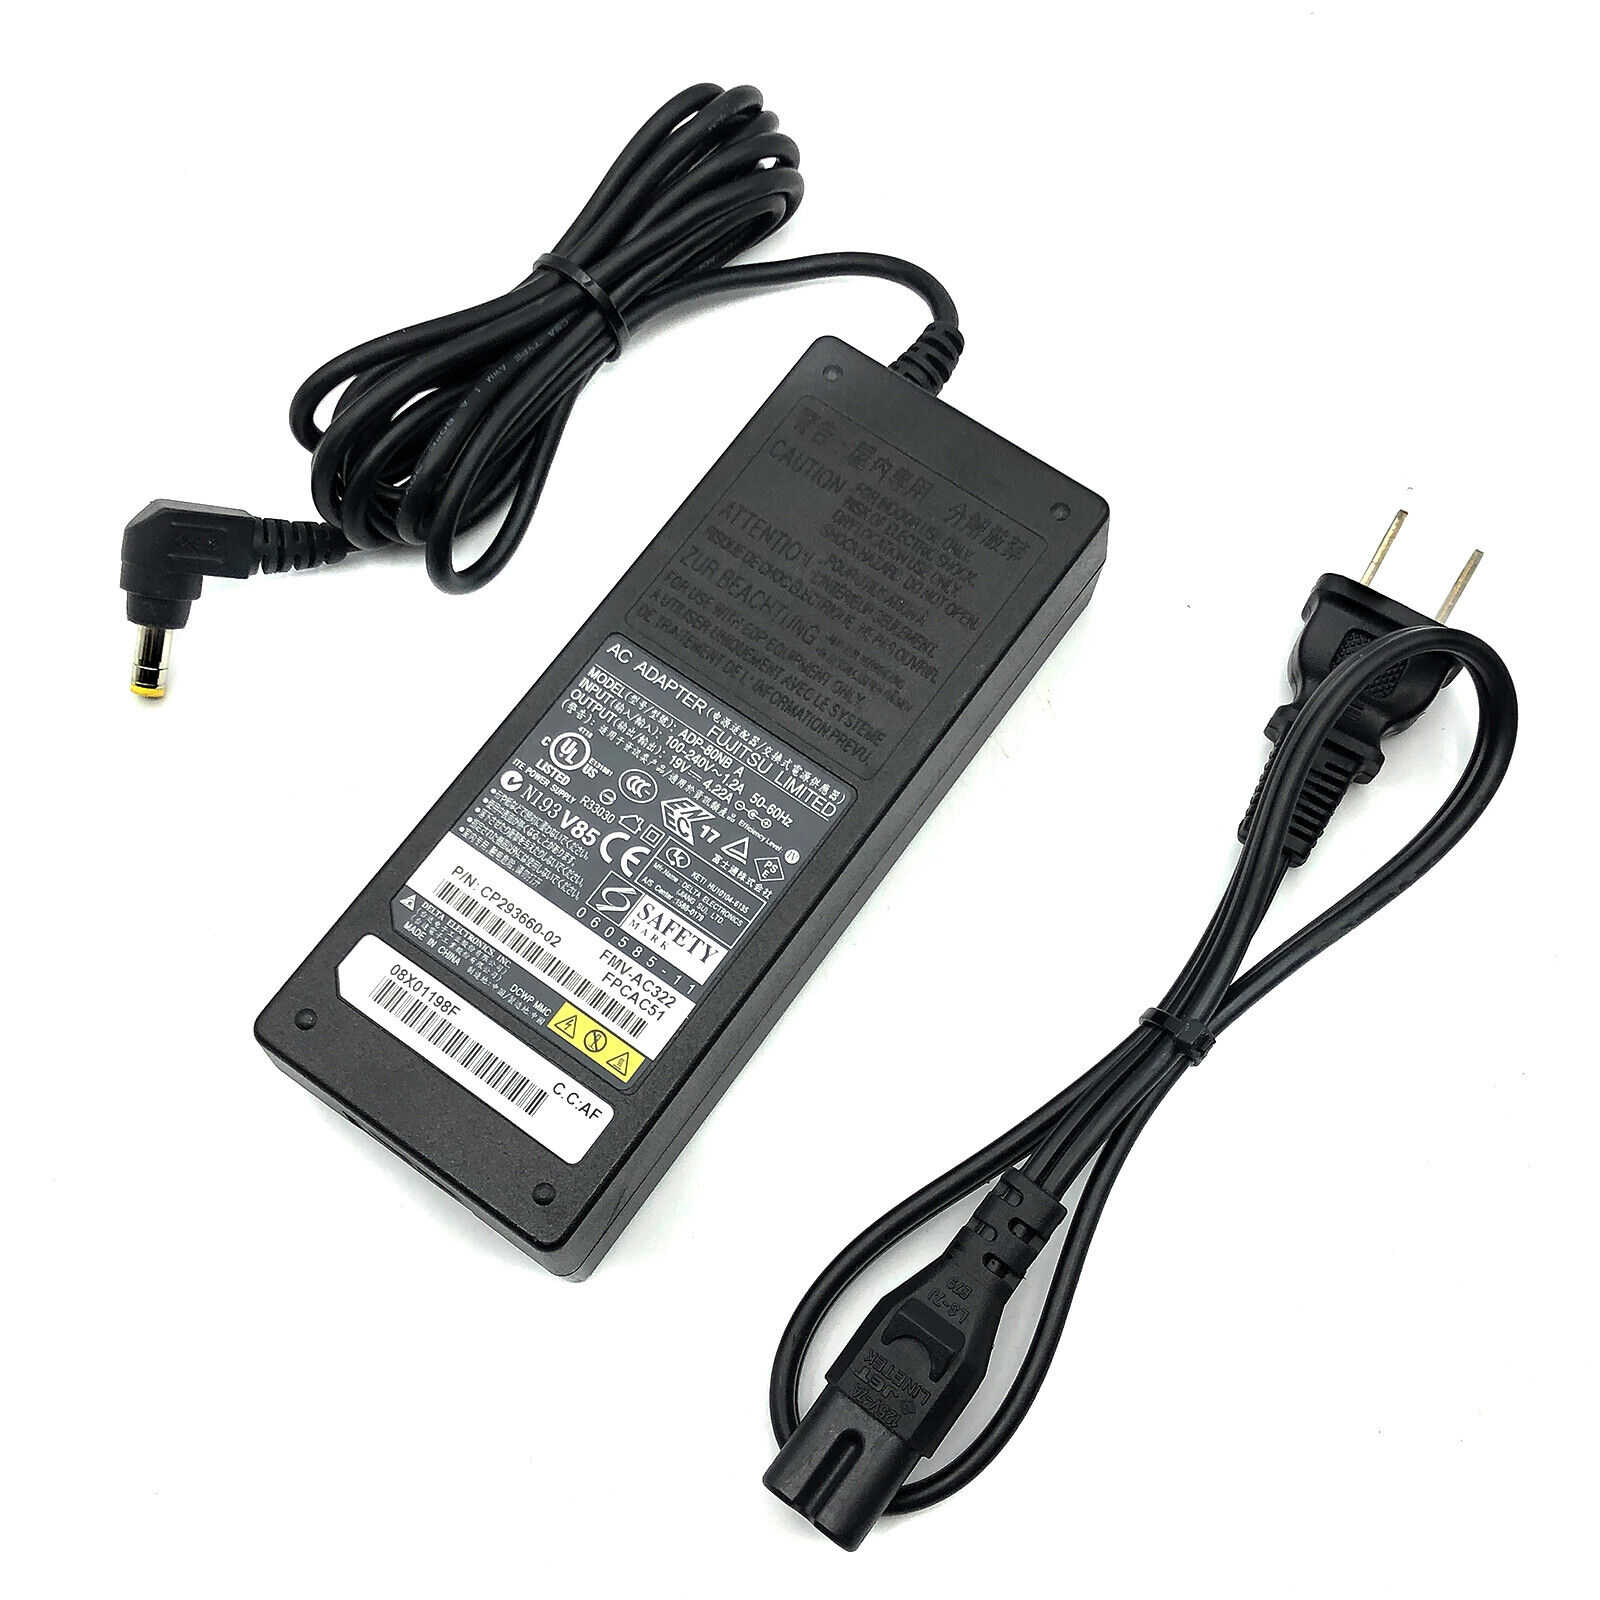 Genuine Fujitsu AC Adapter 80W for LifeBook T900 T901 Laptop Tablet PC w/Cord 